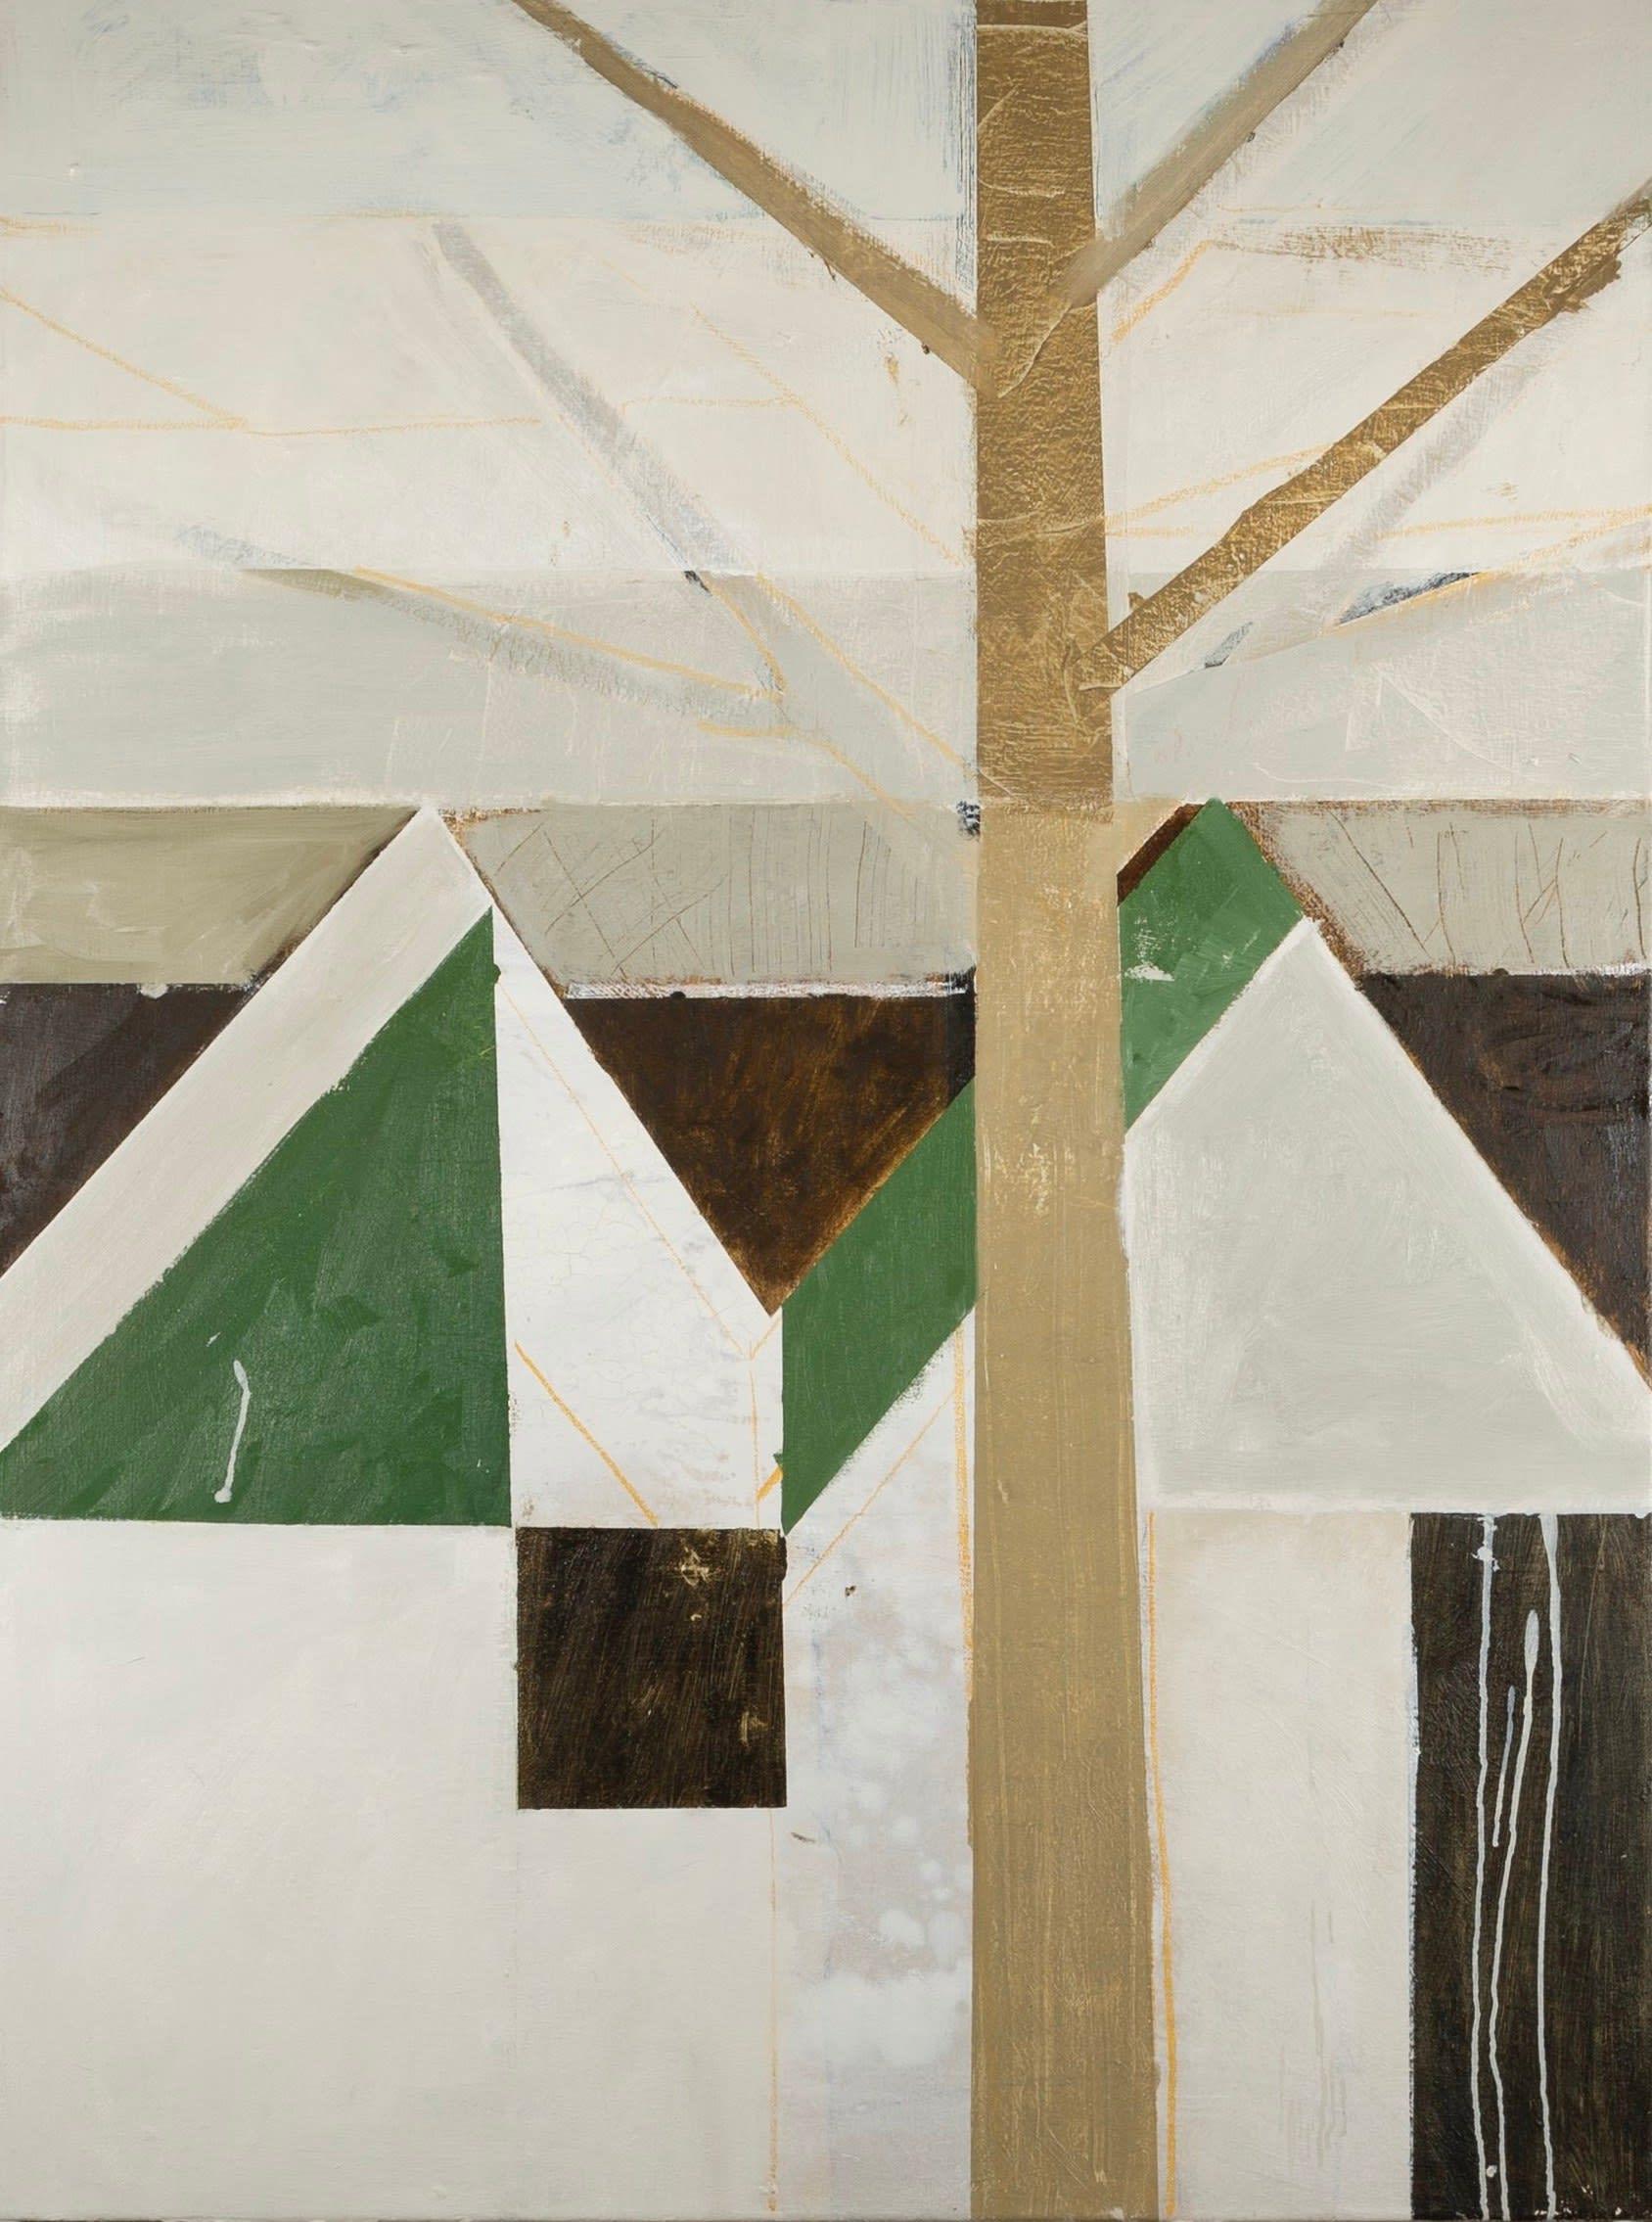 House with Green, Oil on Canvas Painting by Daisy Cook B. 1965, 2024

Additional information:
Medium: Oil on canvas
Dimensions: 100 x 77 cm
39 3/8 x 30 1/4 in

Daisy Cook is a British painter of landscape and still life.

Cook creates abstracted